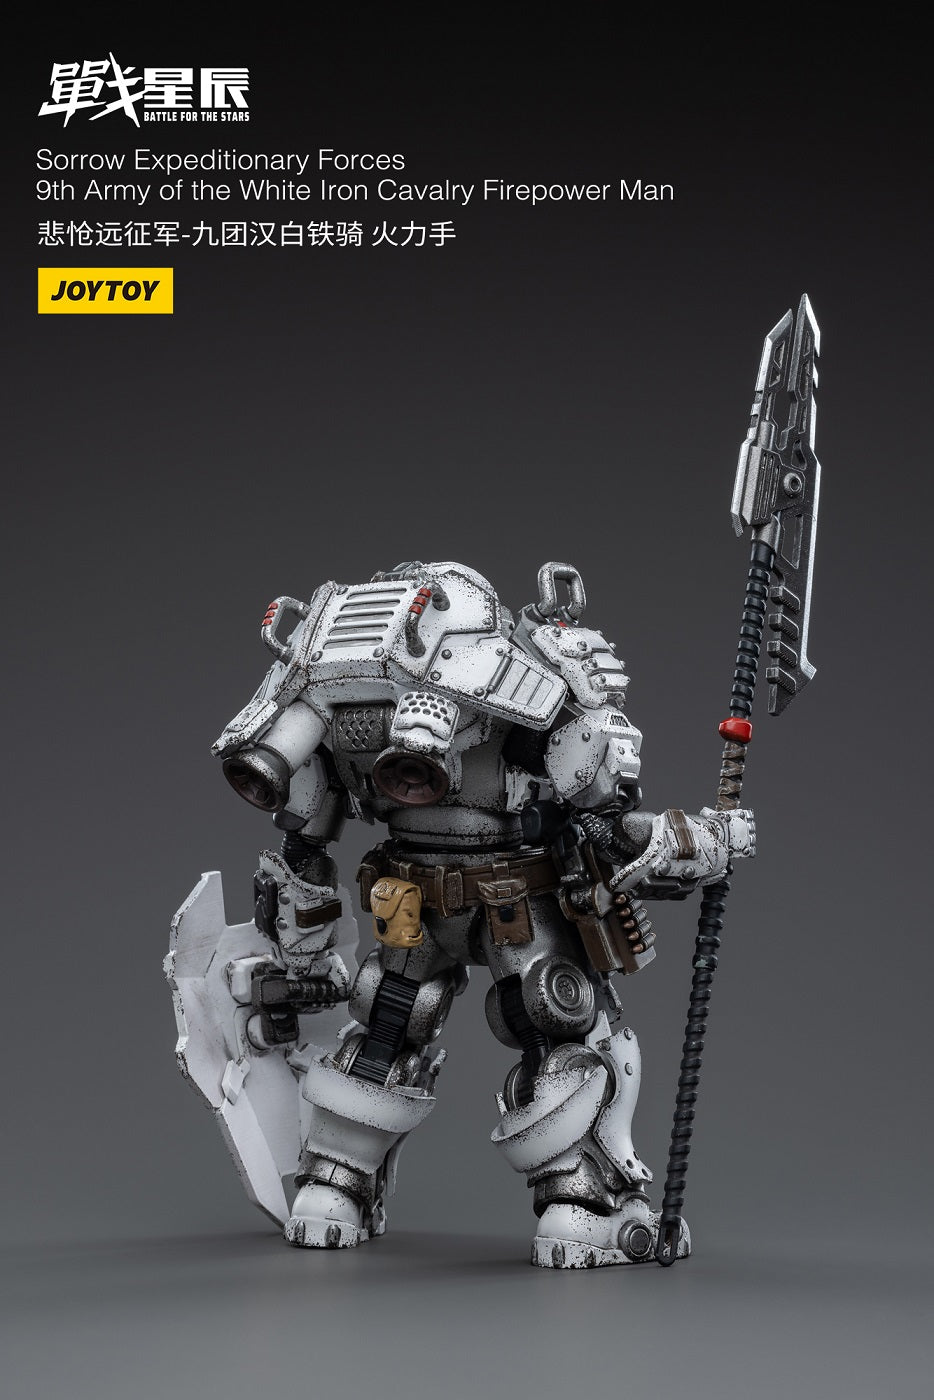 Sorrow Expeditionary Forces-9th Army of the white Iron Cavalry Firepower Man - Action Figure By JOYTOY